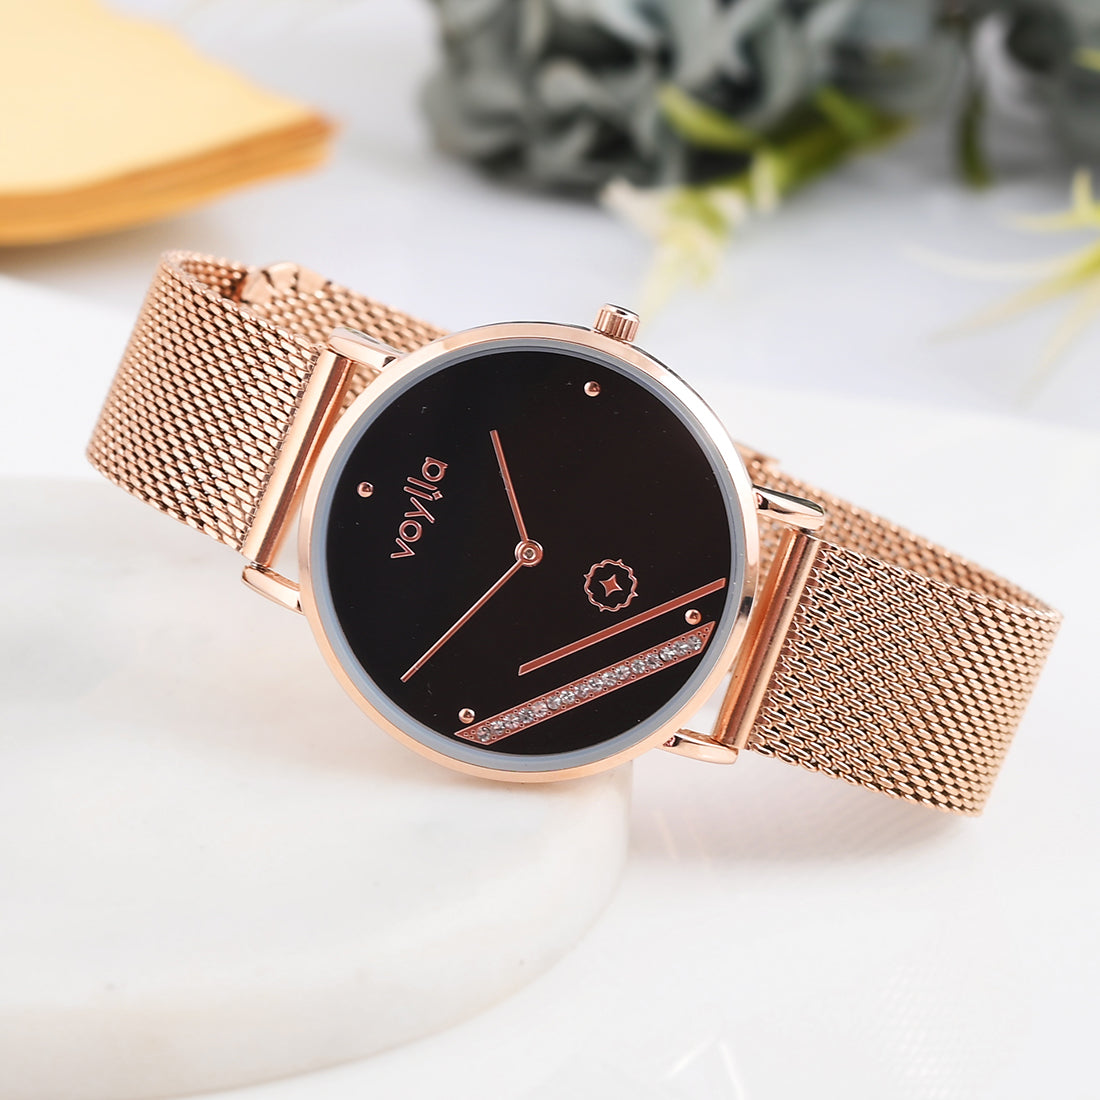 Voylla Studded Gold Toned Watch